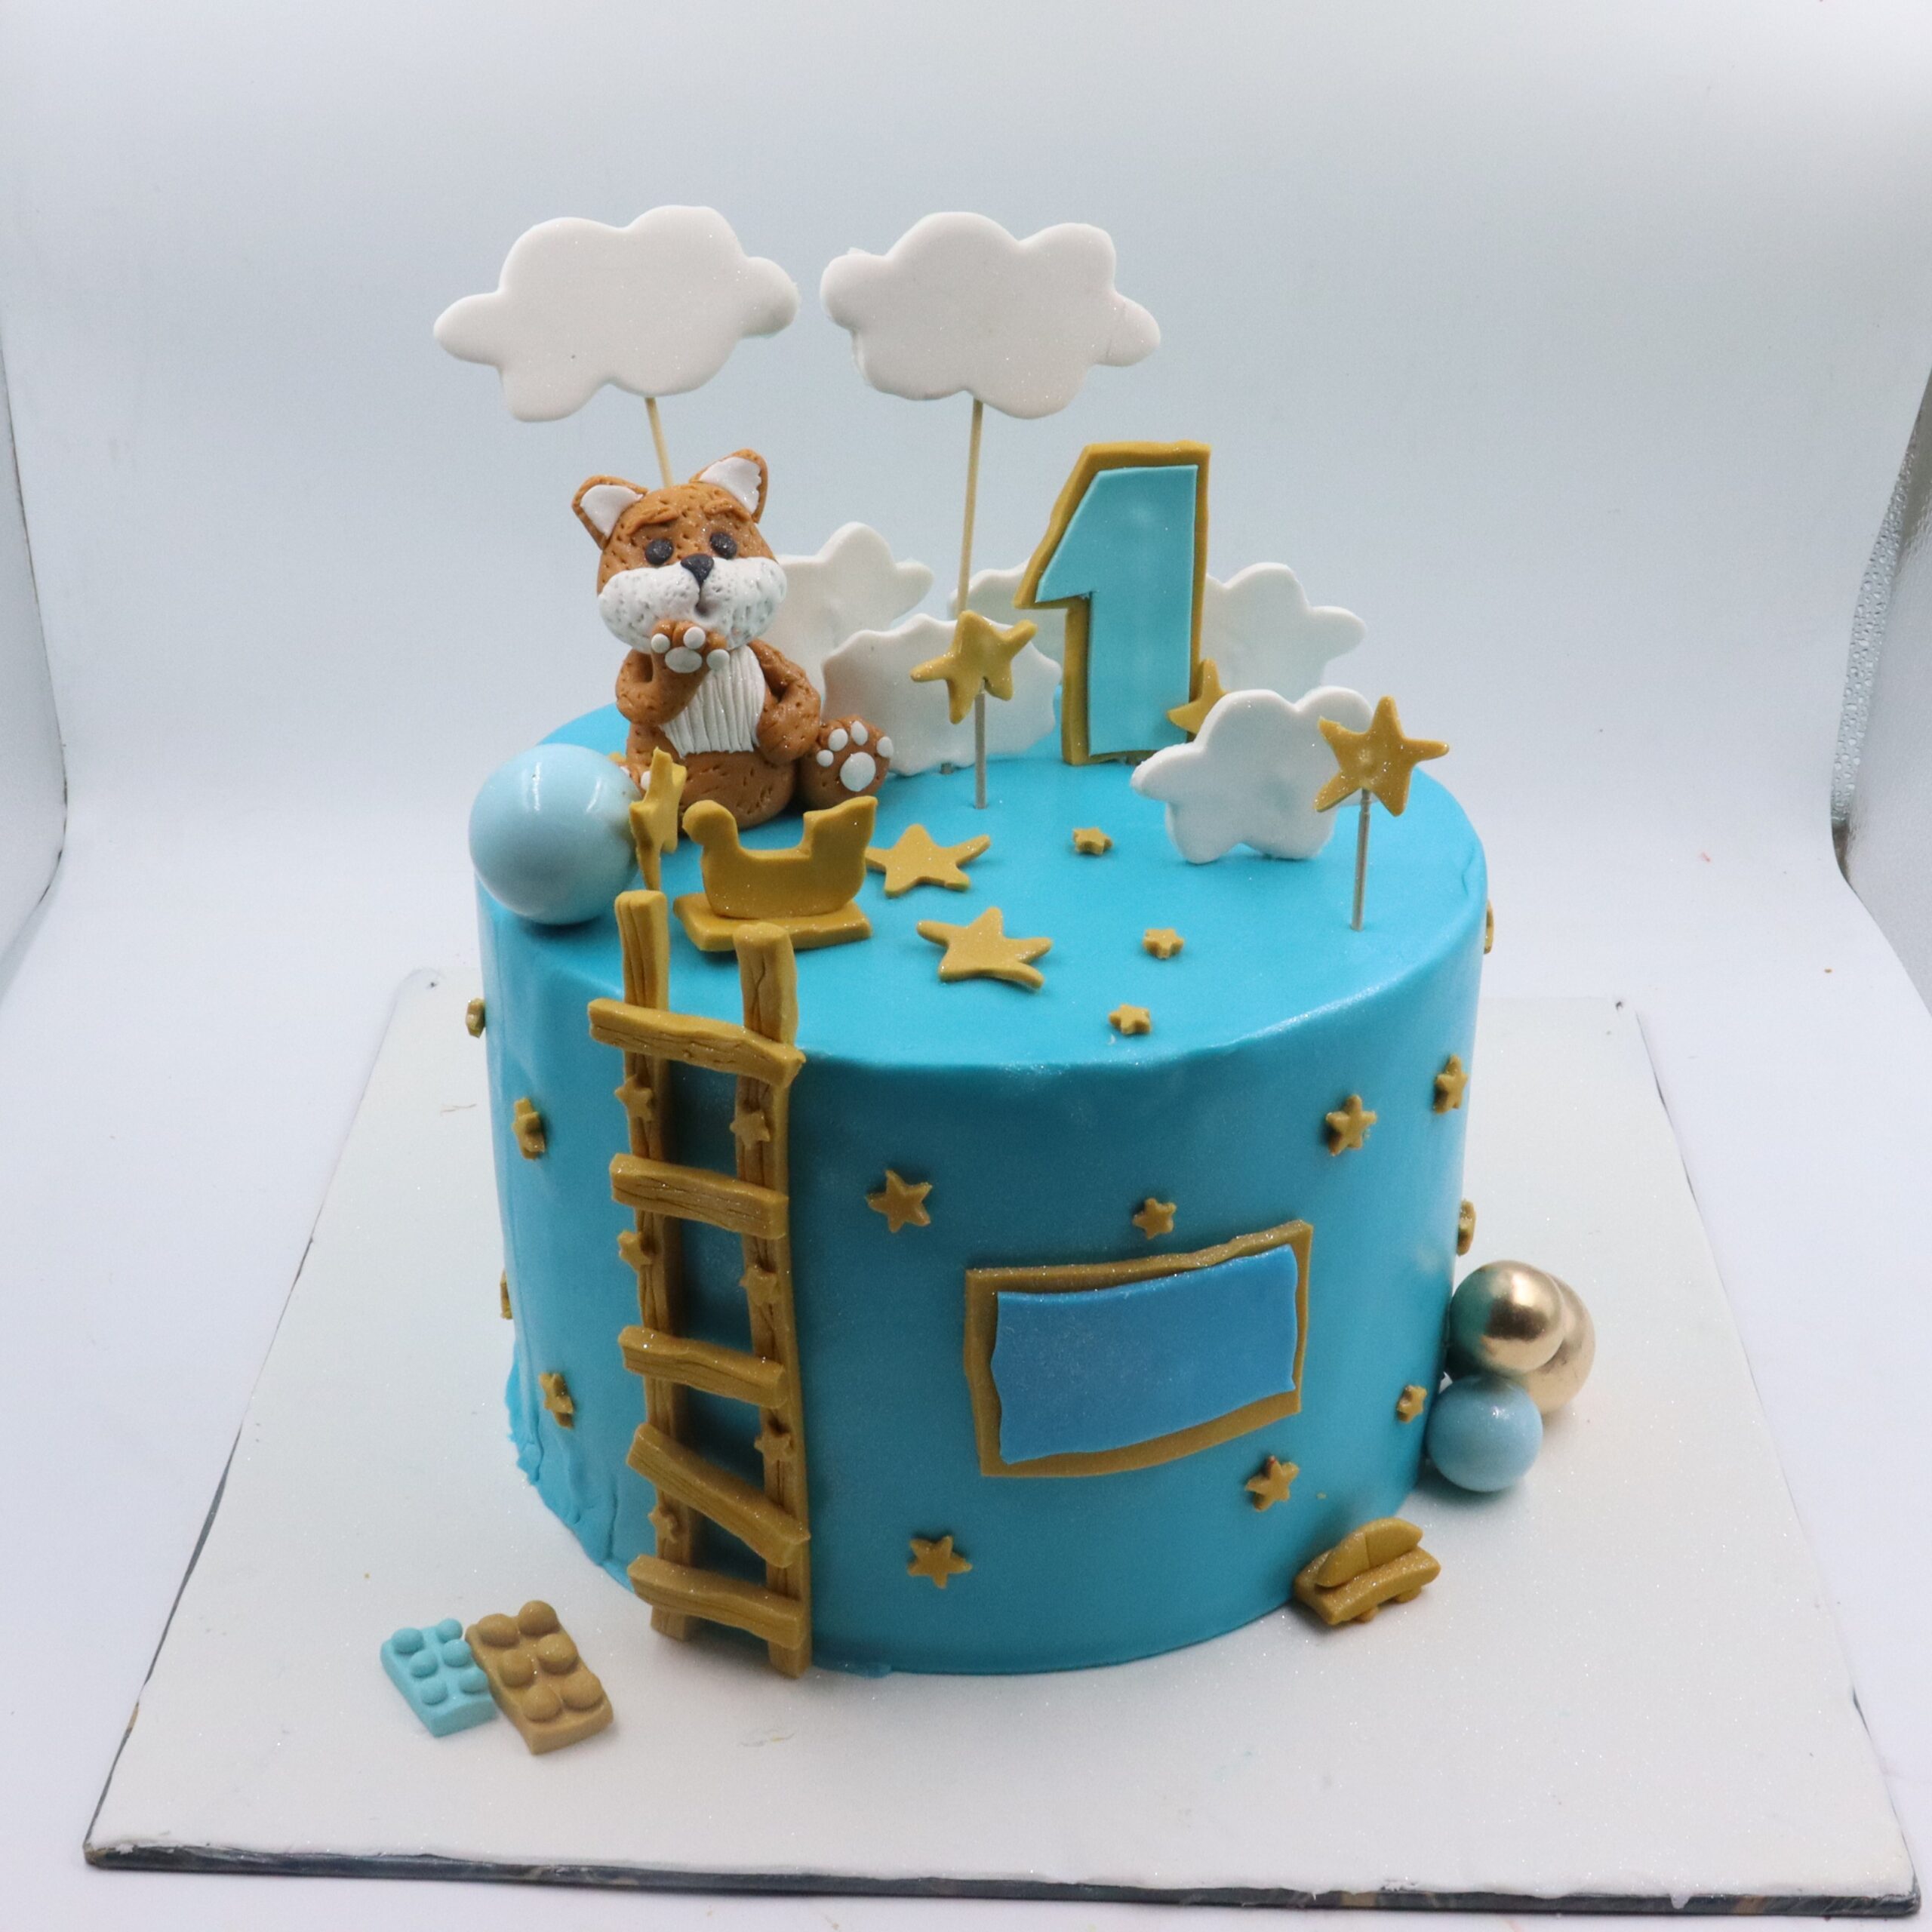 Buy Foodie Theme Cake Online | Themed Cakes for Foodies | Best Cakes for  Birthday | Birthday Cakes Online Order - The Baker's Table